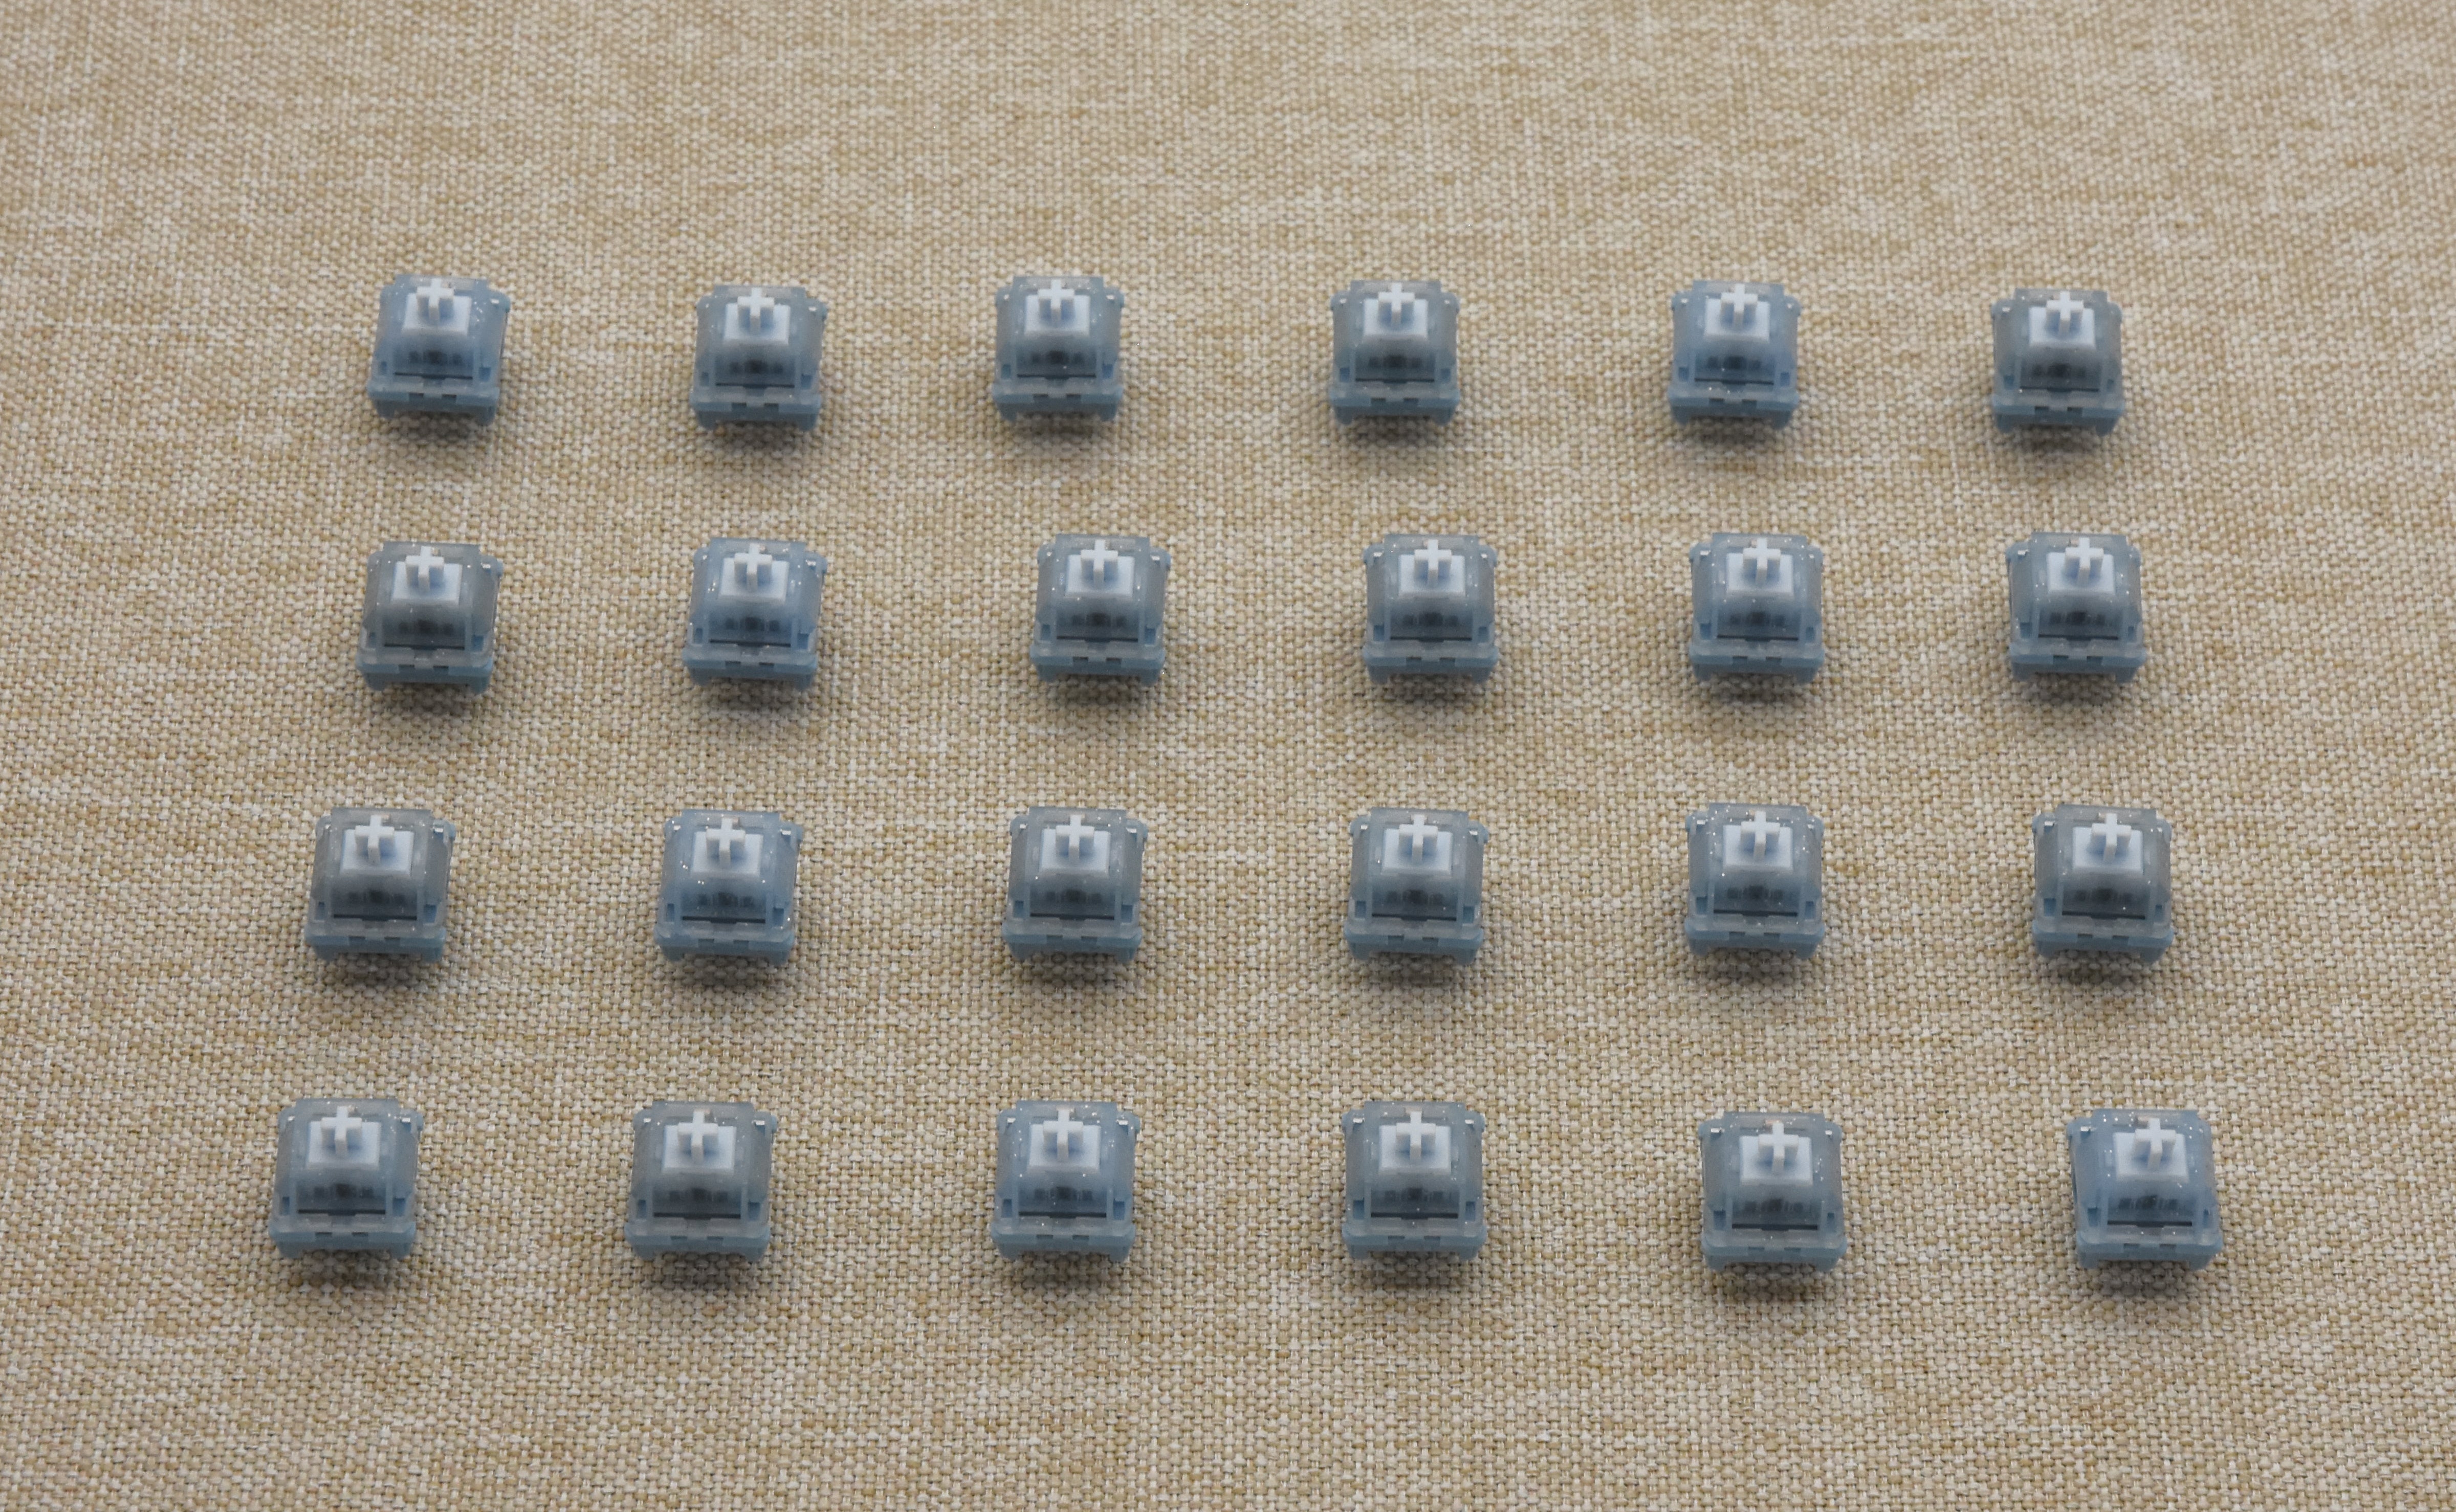 HMX BLUE TOPAZ LINEAR SWITCH FACTORY LUBED EDITION (10PCS)